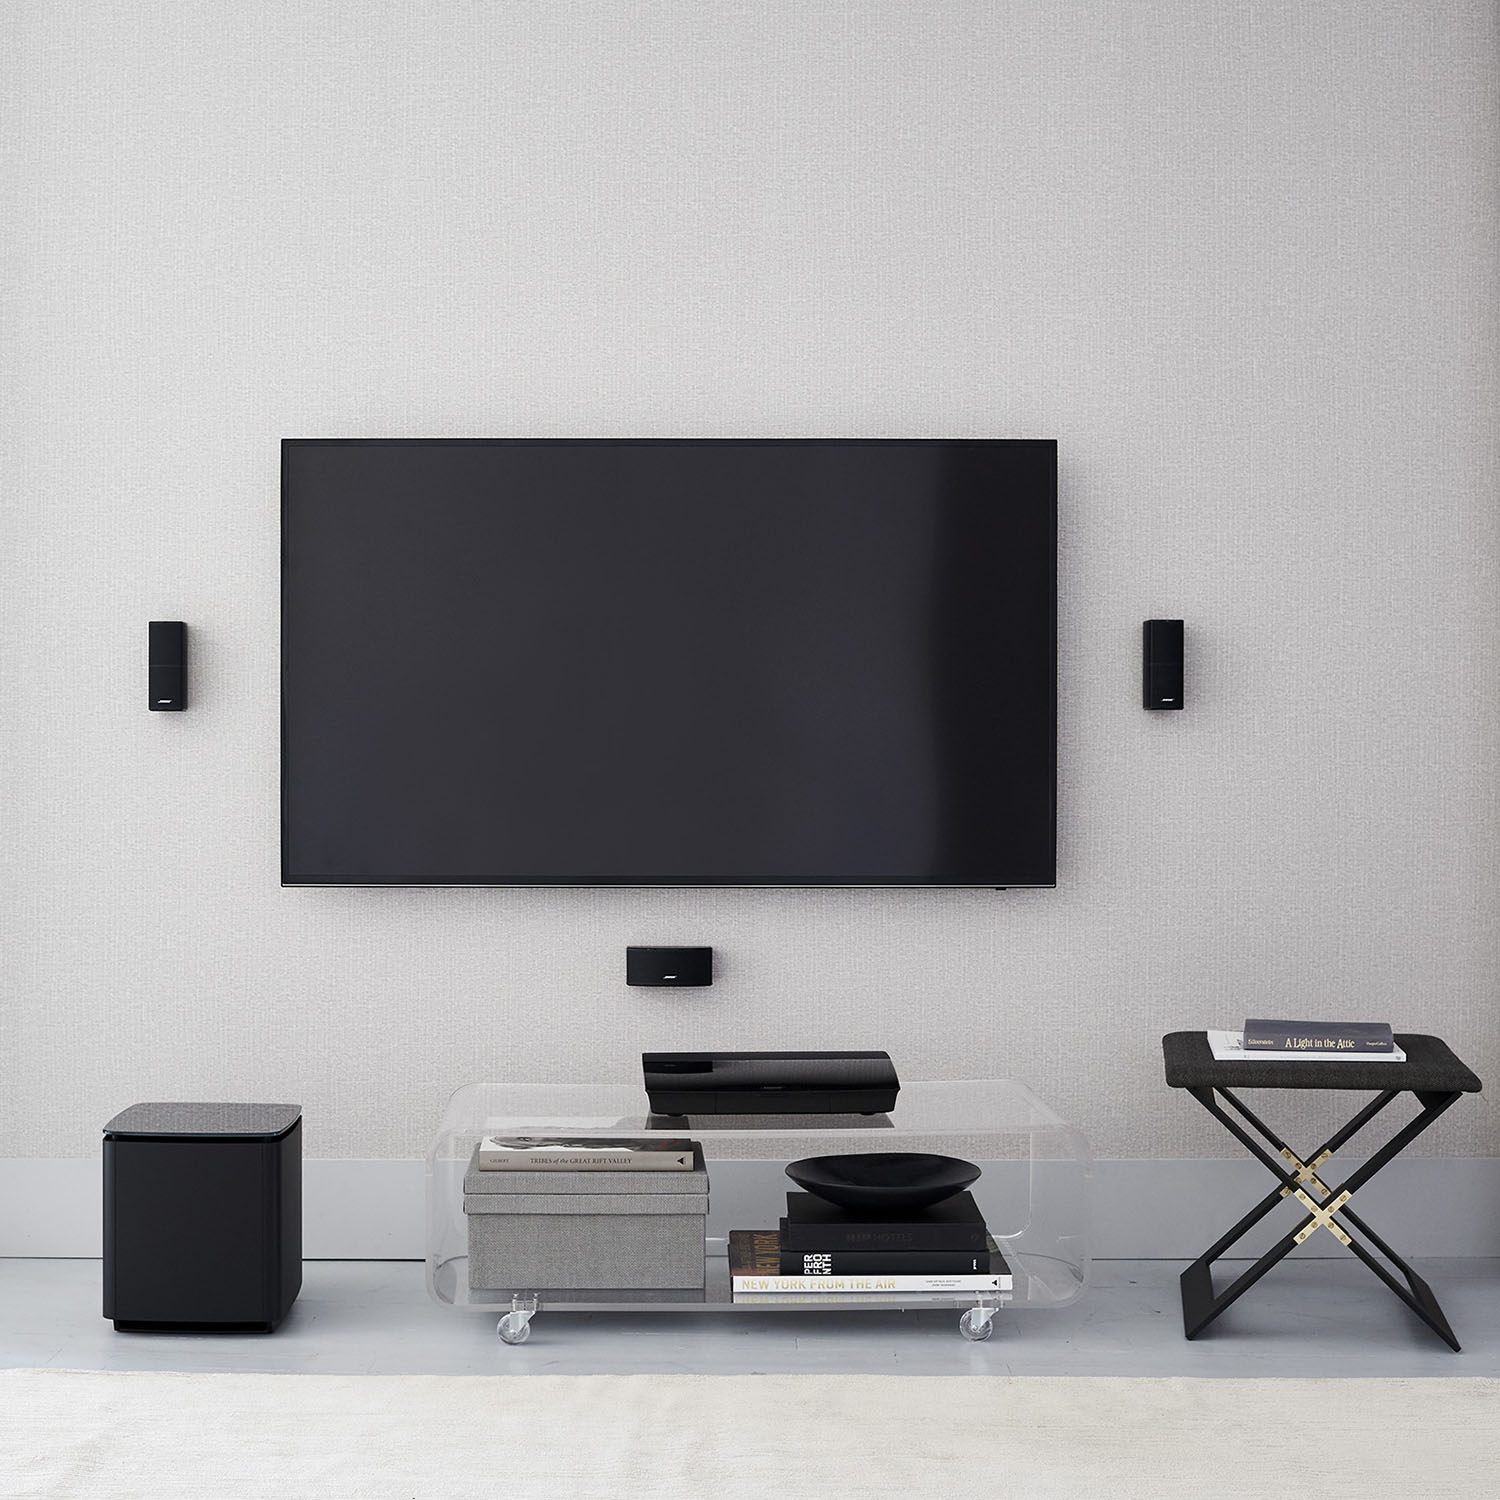 Bose Lifestyle Theaters l Get The Best Miami Home Theater